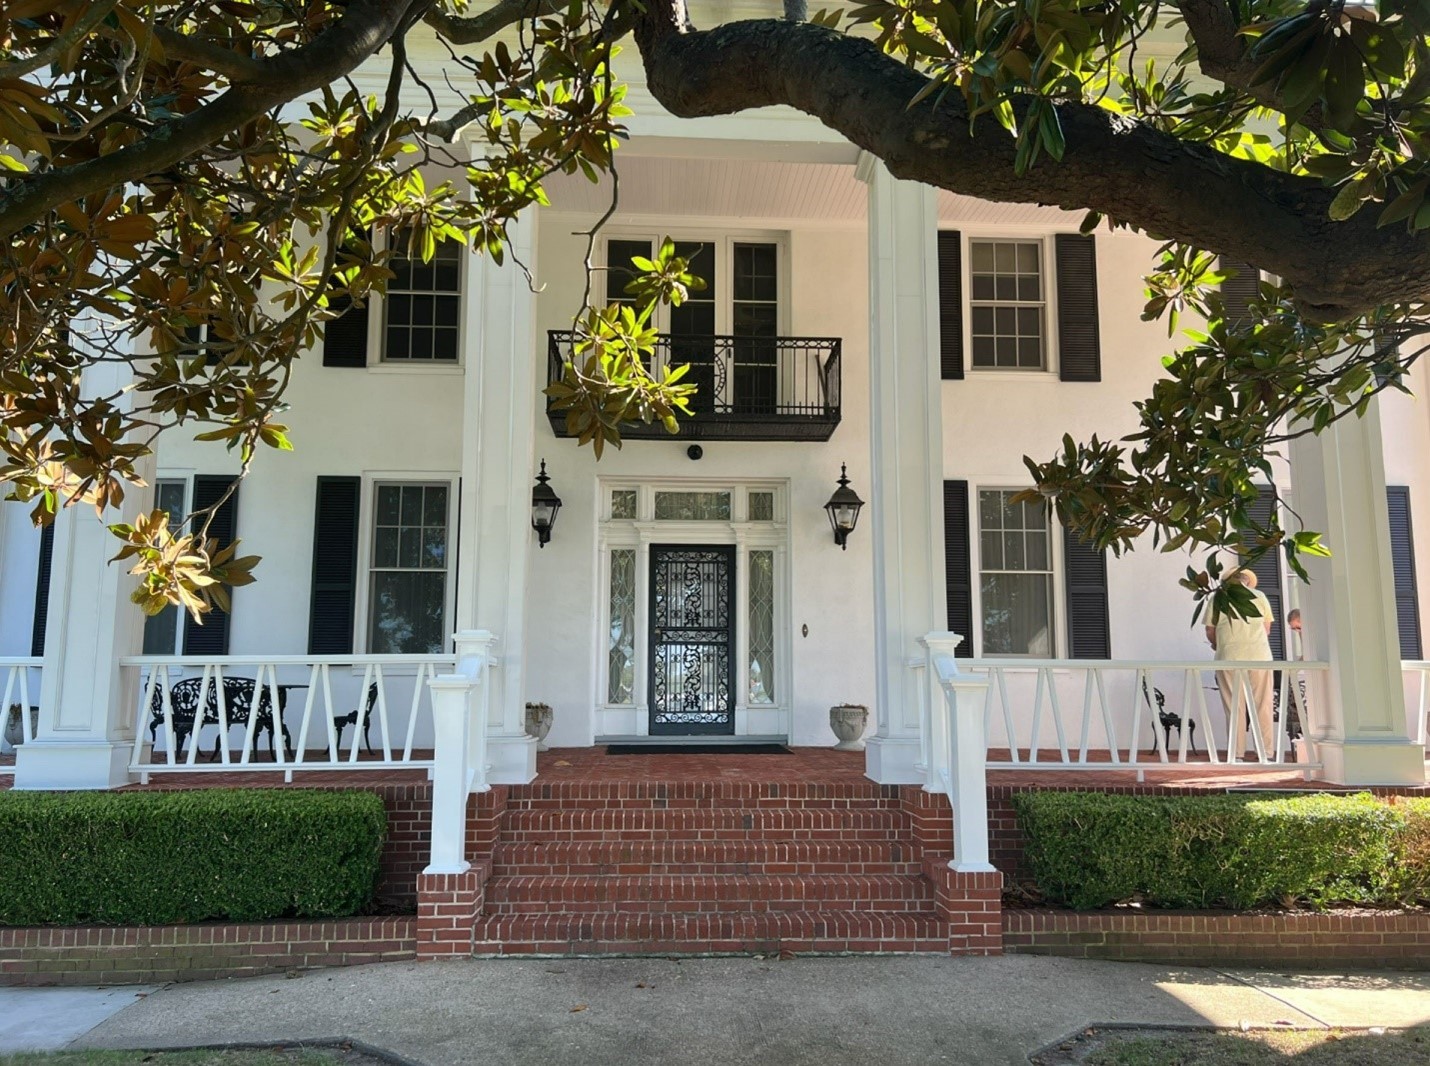 Large, three-story white building with pillars and a front porch in the background and a leafy tree branch in the foreground.